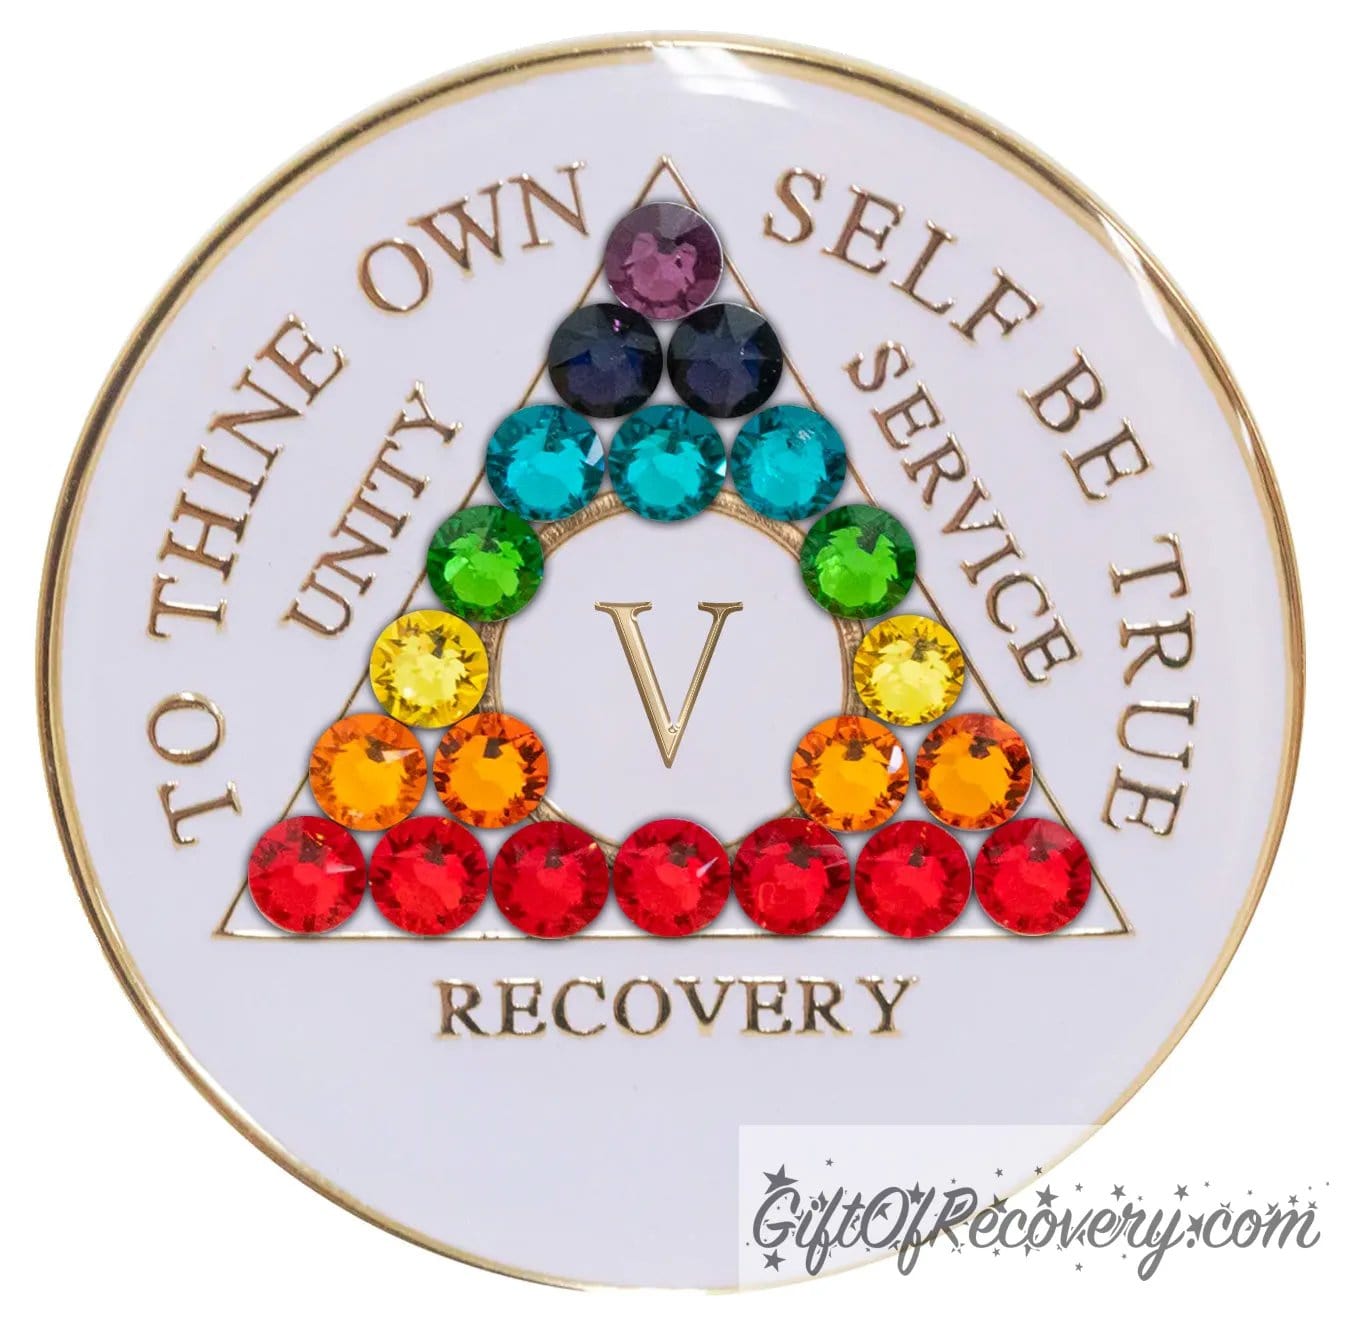 Sobriety Chip AA Chakra Bling Crystallized White Triplate 5 Years